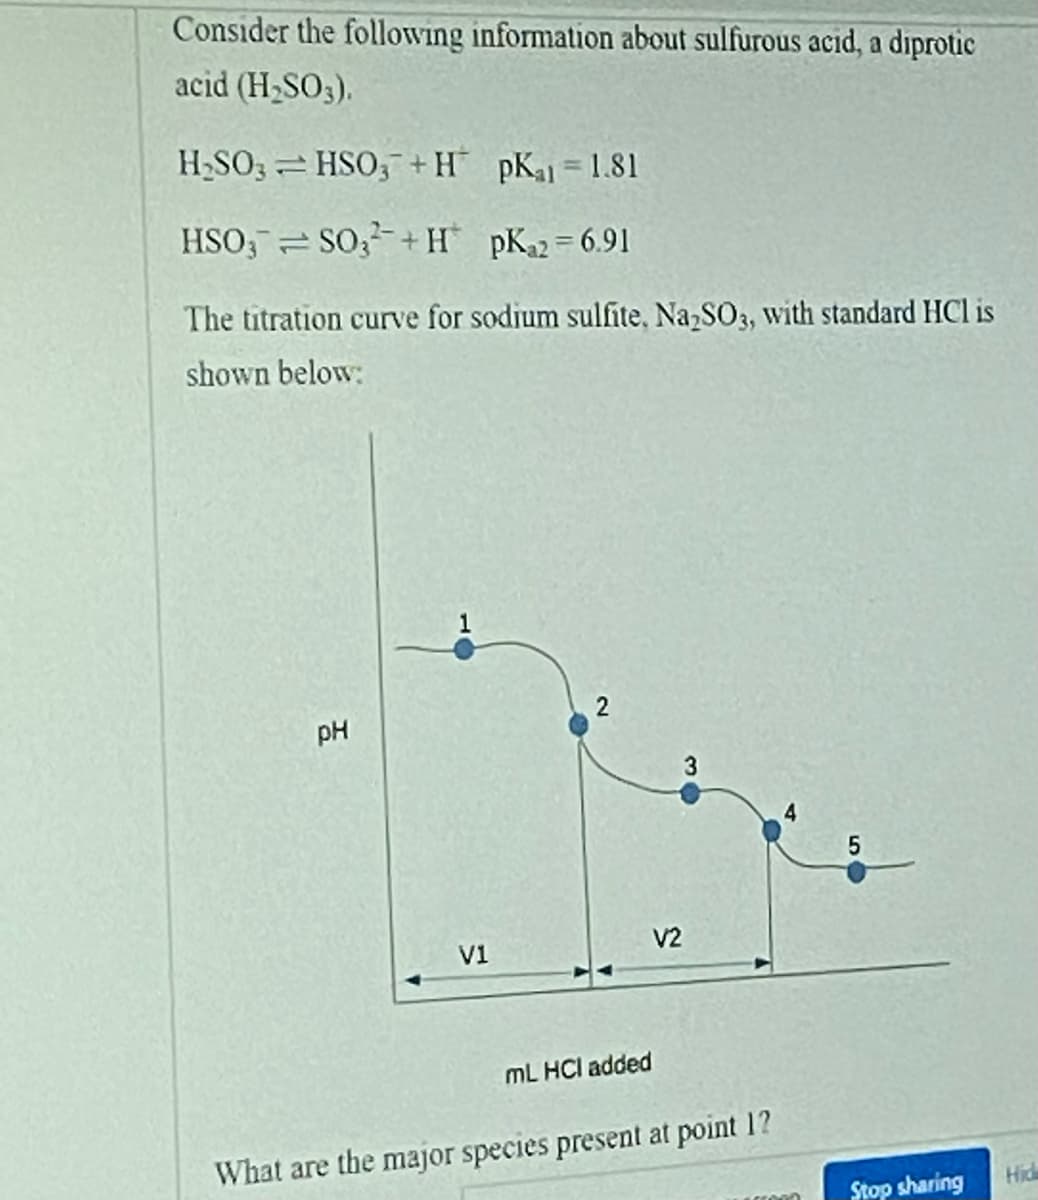 Consider the following information about sulfurous acıd, a diprotic
acid (H2SO3).
H2SO; = HSO, + H pKa1 = 1.81
HSO,= SO,+ H pK2 = 6.91
The titration curve for sodium sulfite, NazSO3, with standard HCl is
shown below:
2
pH
V2
V1
ML HCl added
What are the major species present at point 1?
Hide
Stop sharing
